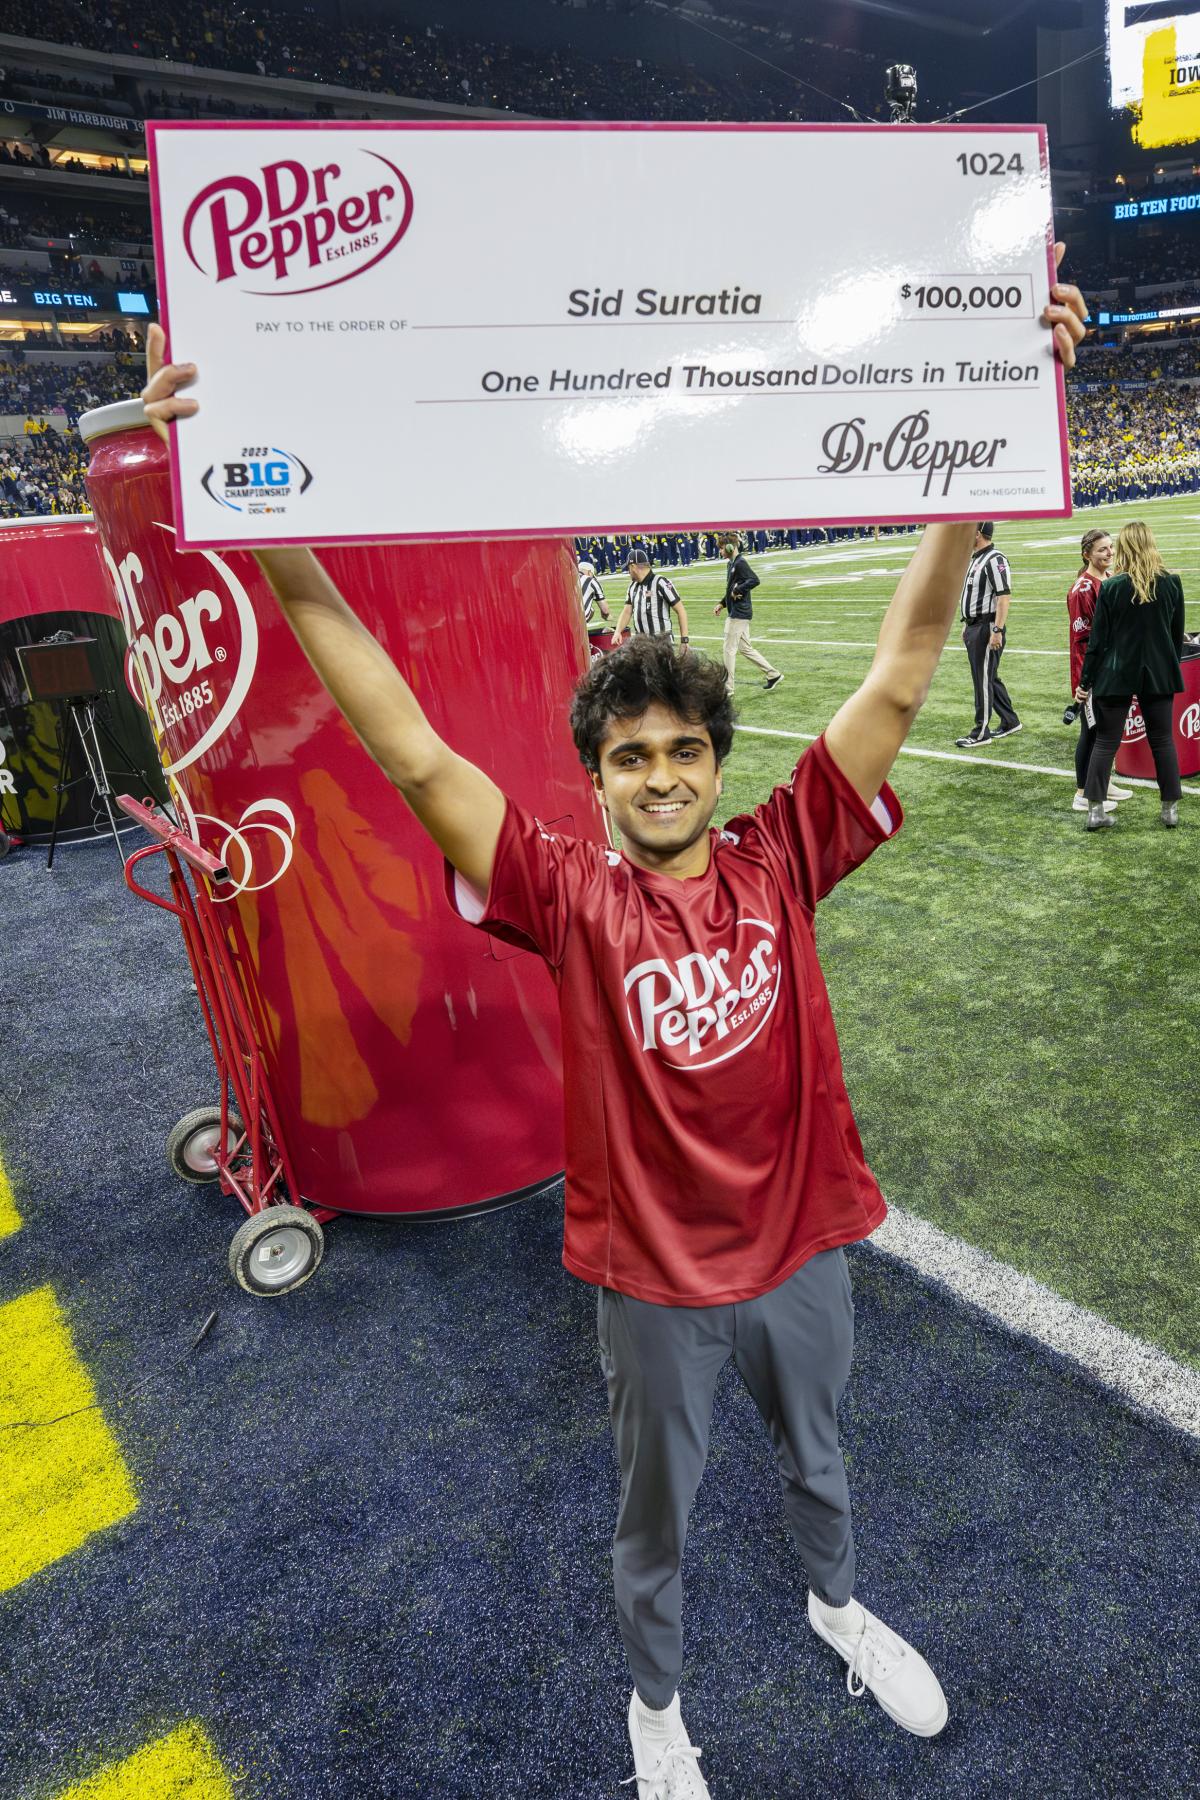 Sid Suratia competes for $100k in tuition money